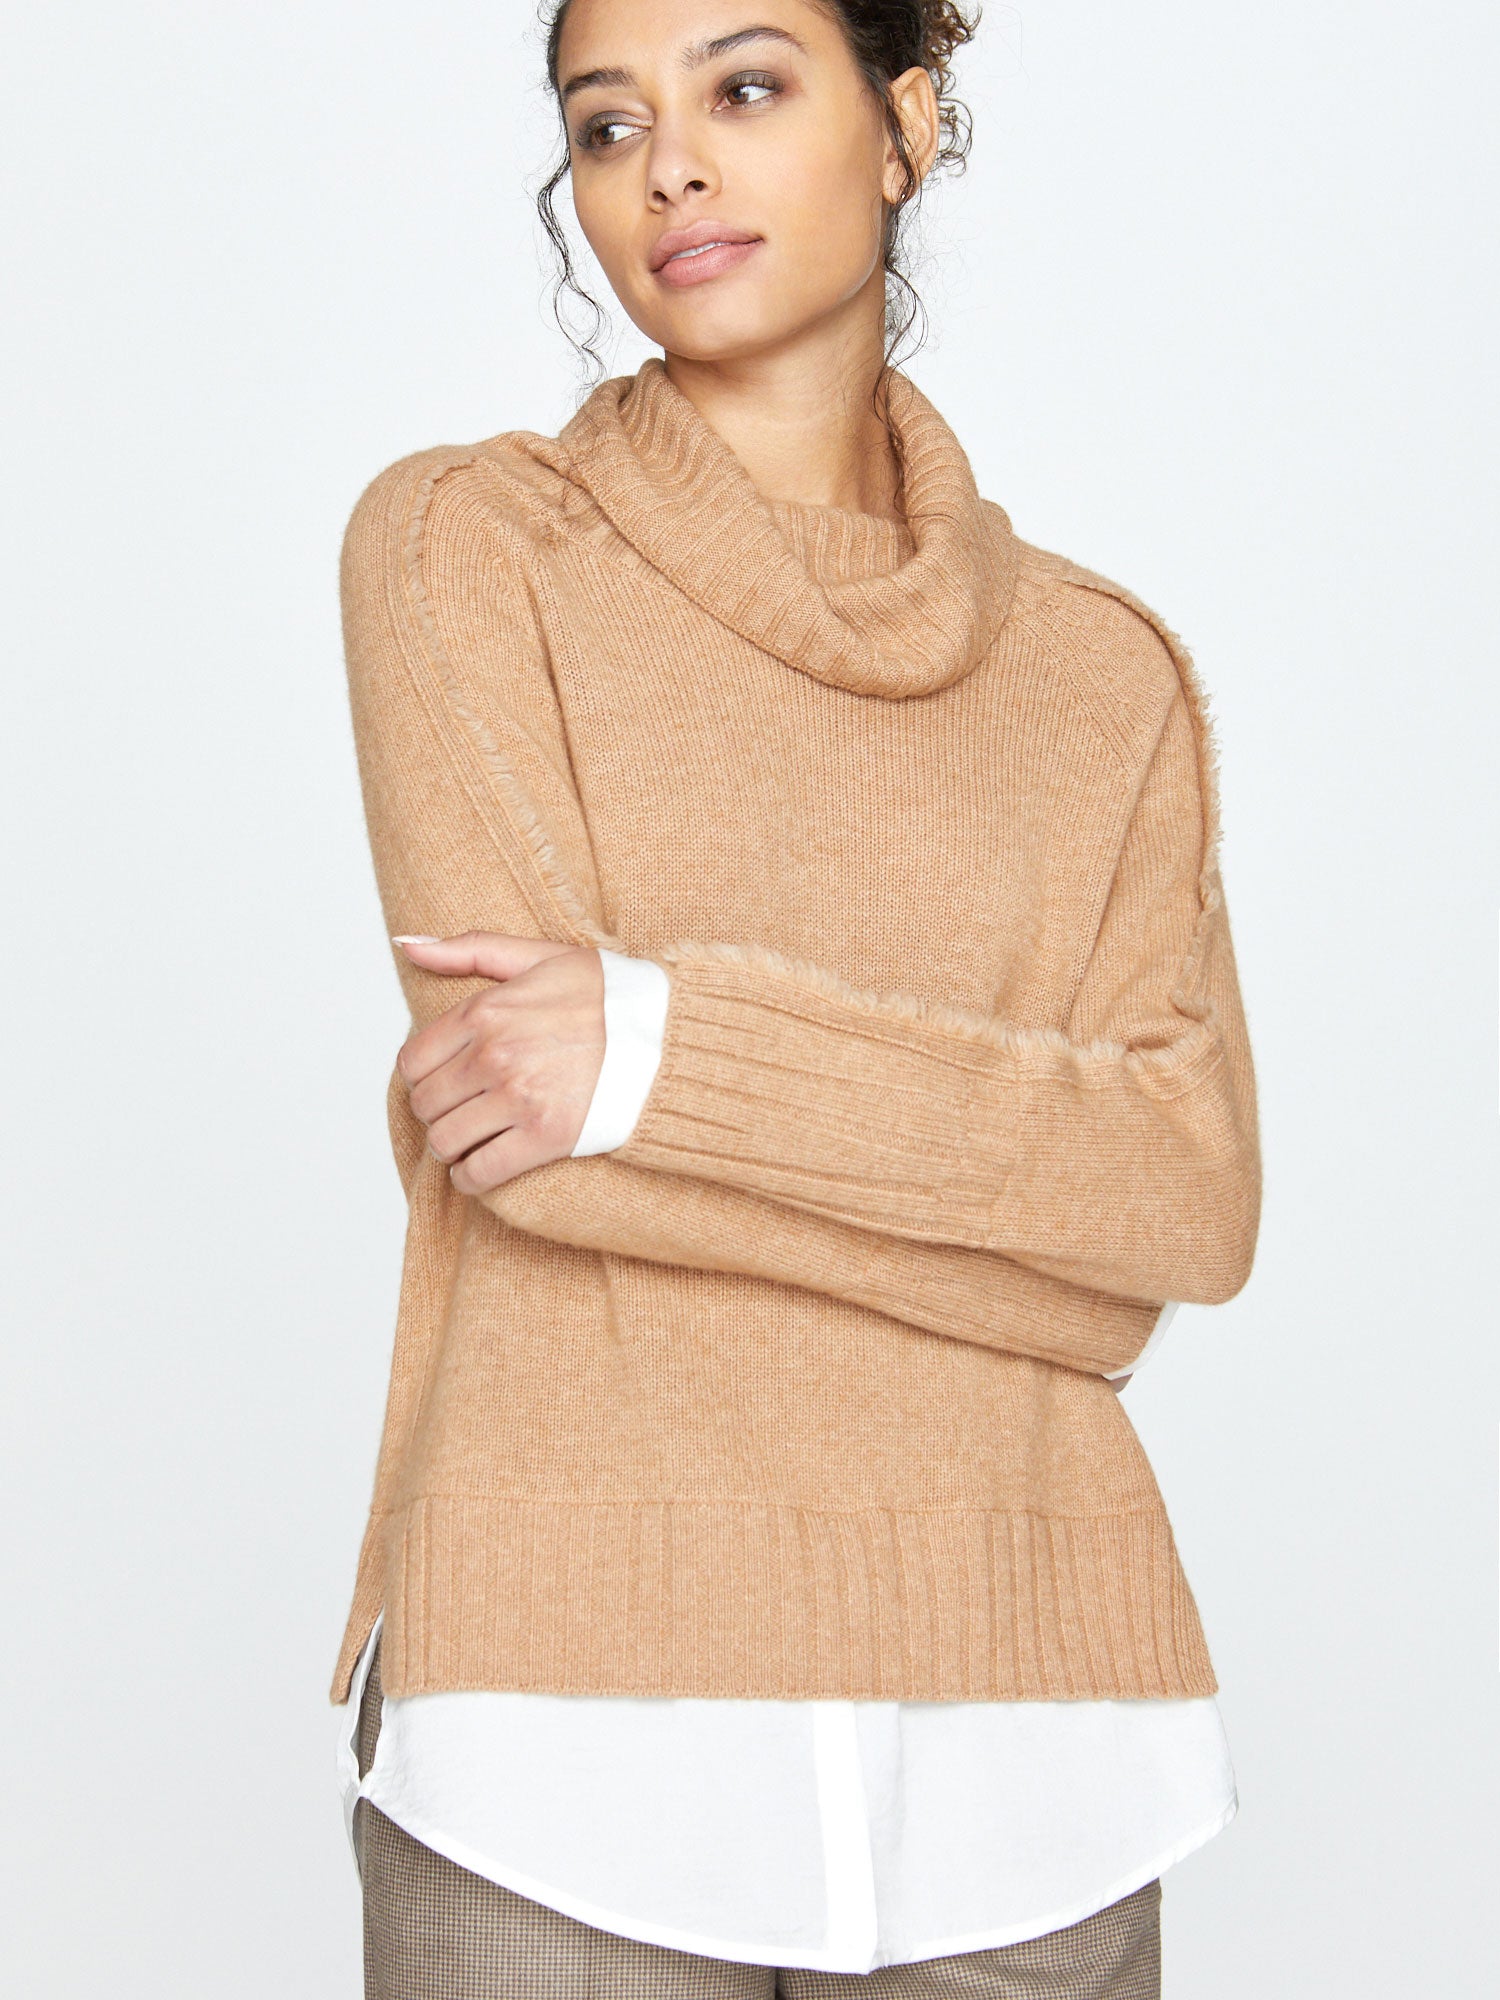 Jolie tan layered turtleneck sweater front view 2